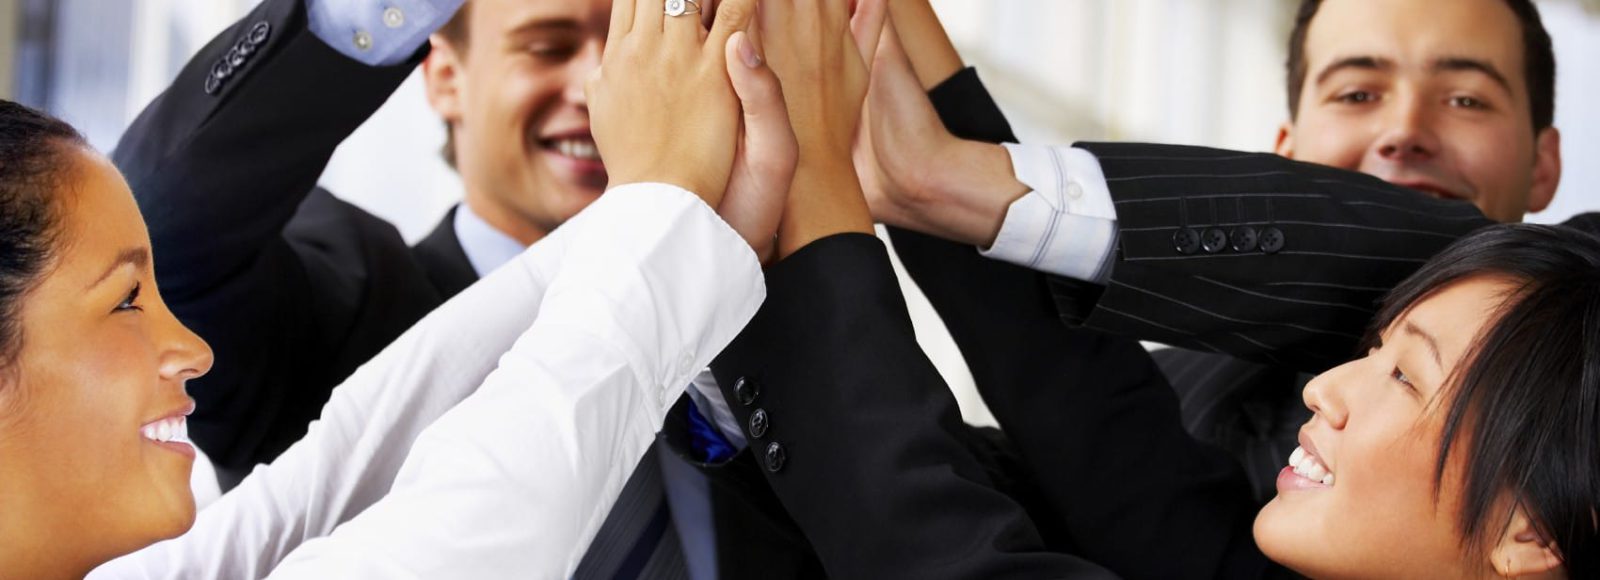 A stock photo of employees high-fiving one another